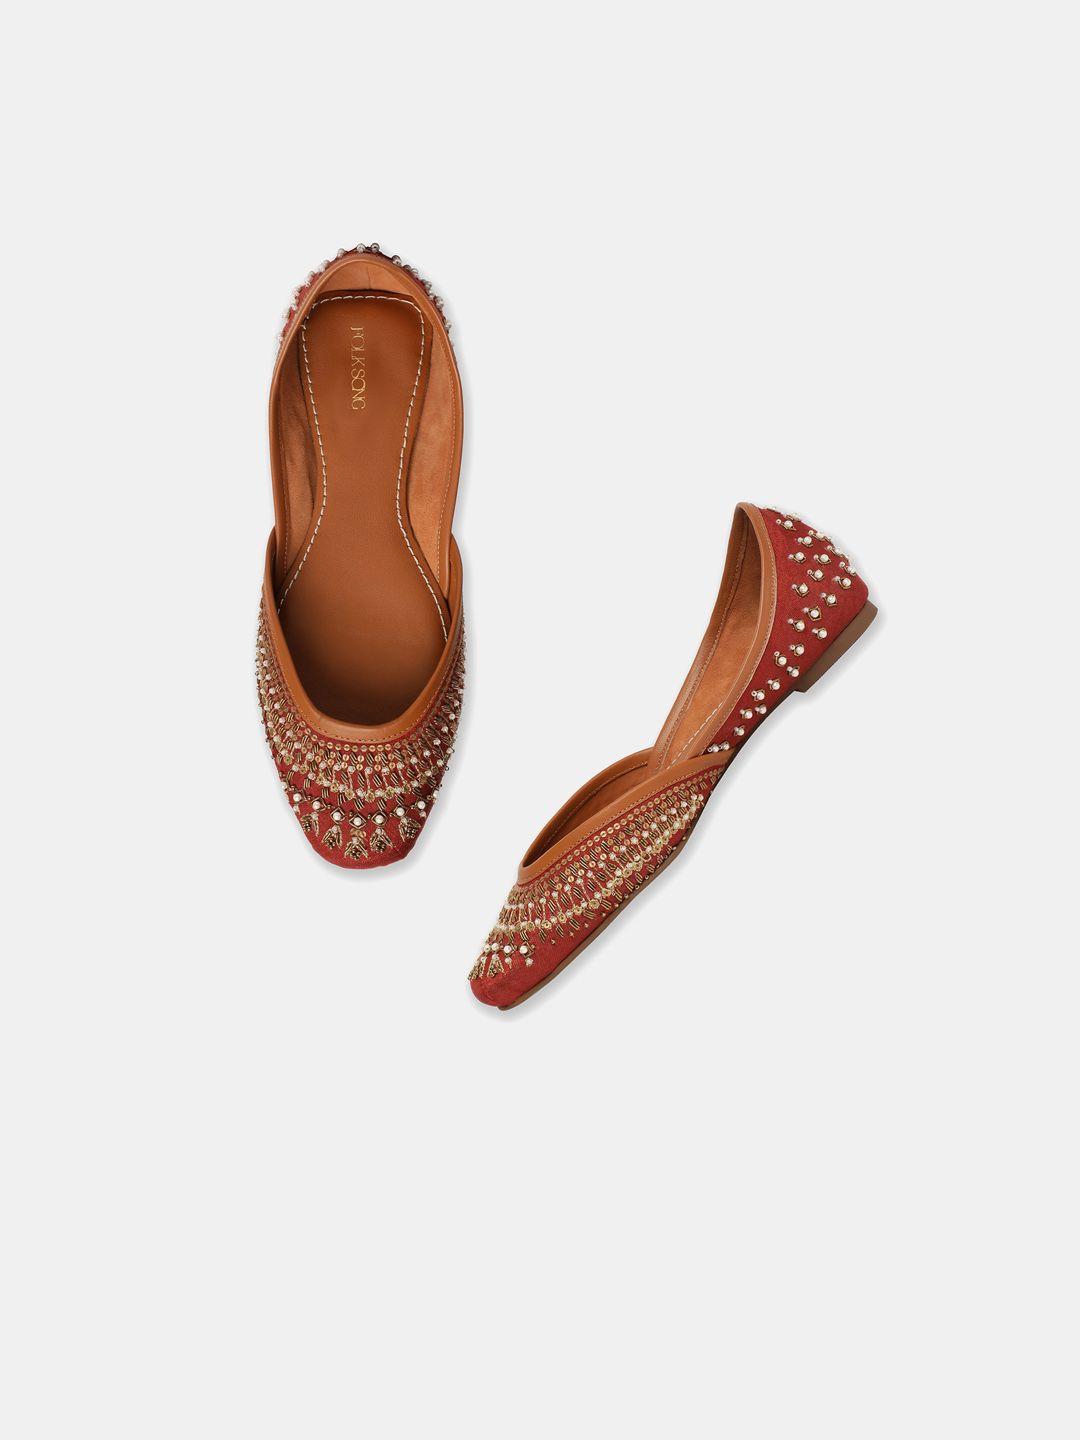 w-the-folksong-collection-women-orange-ethnic-ballerinas-flats